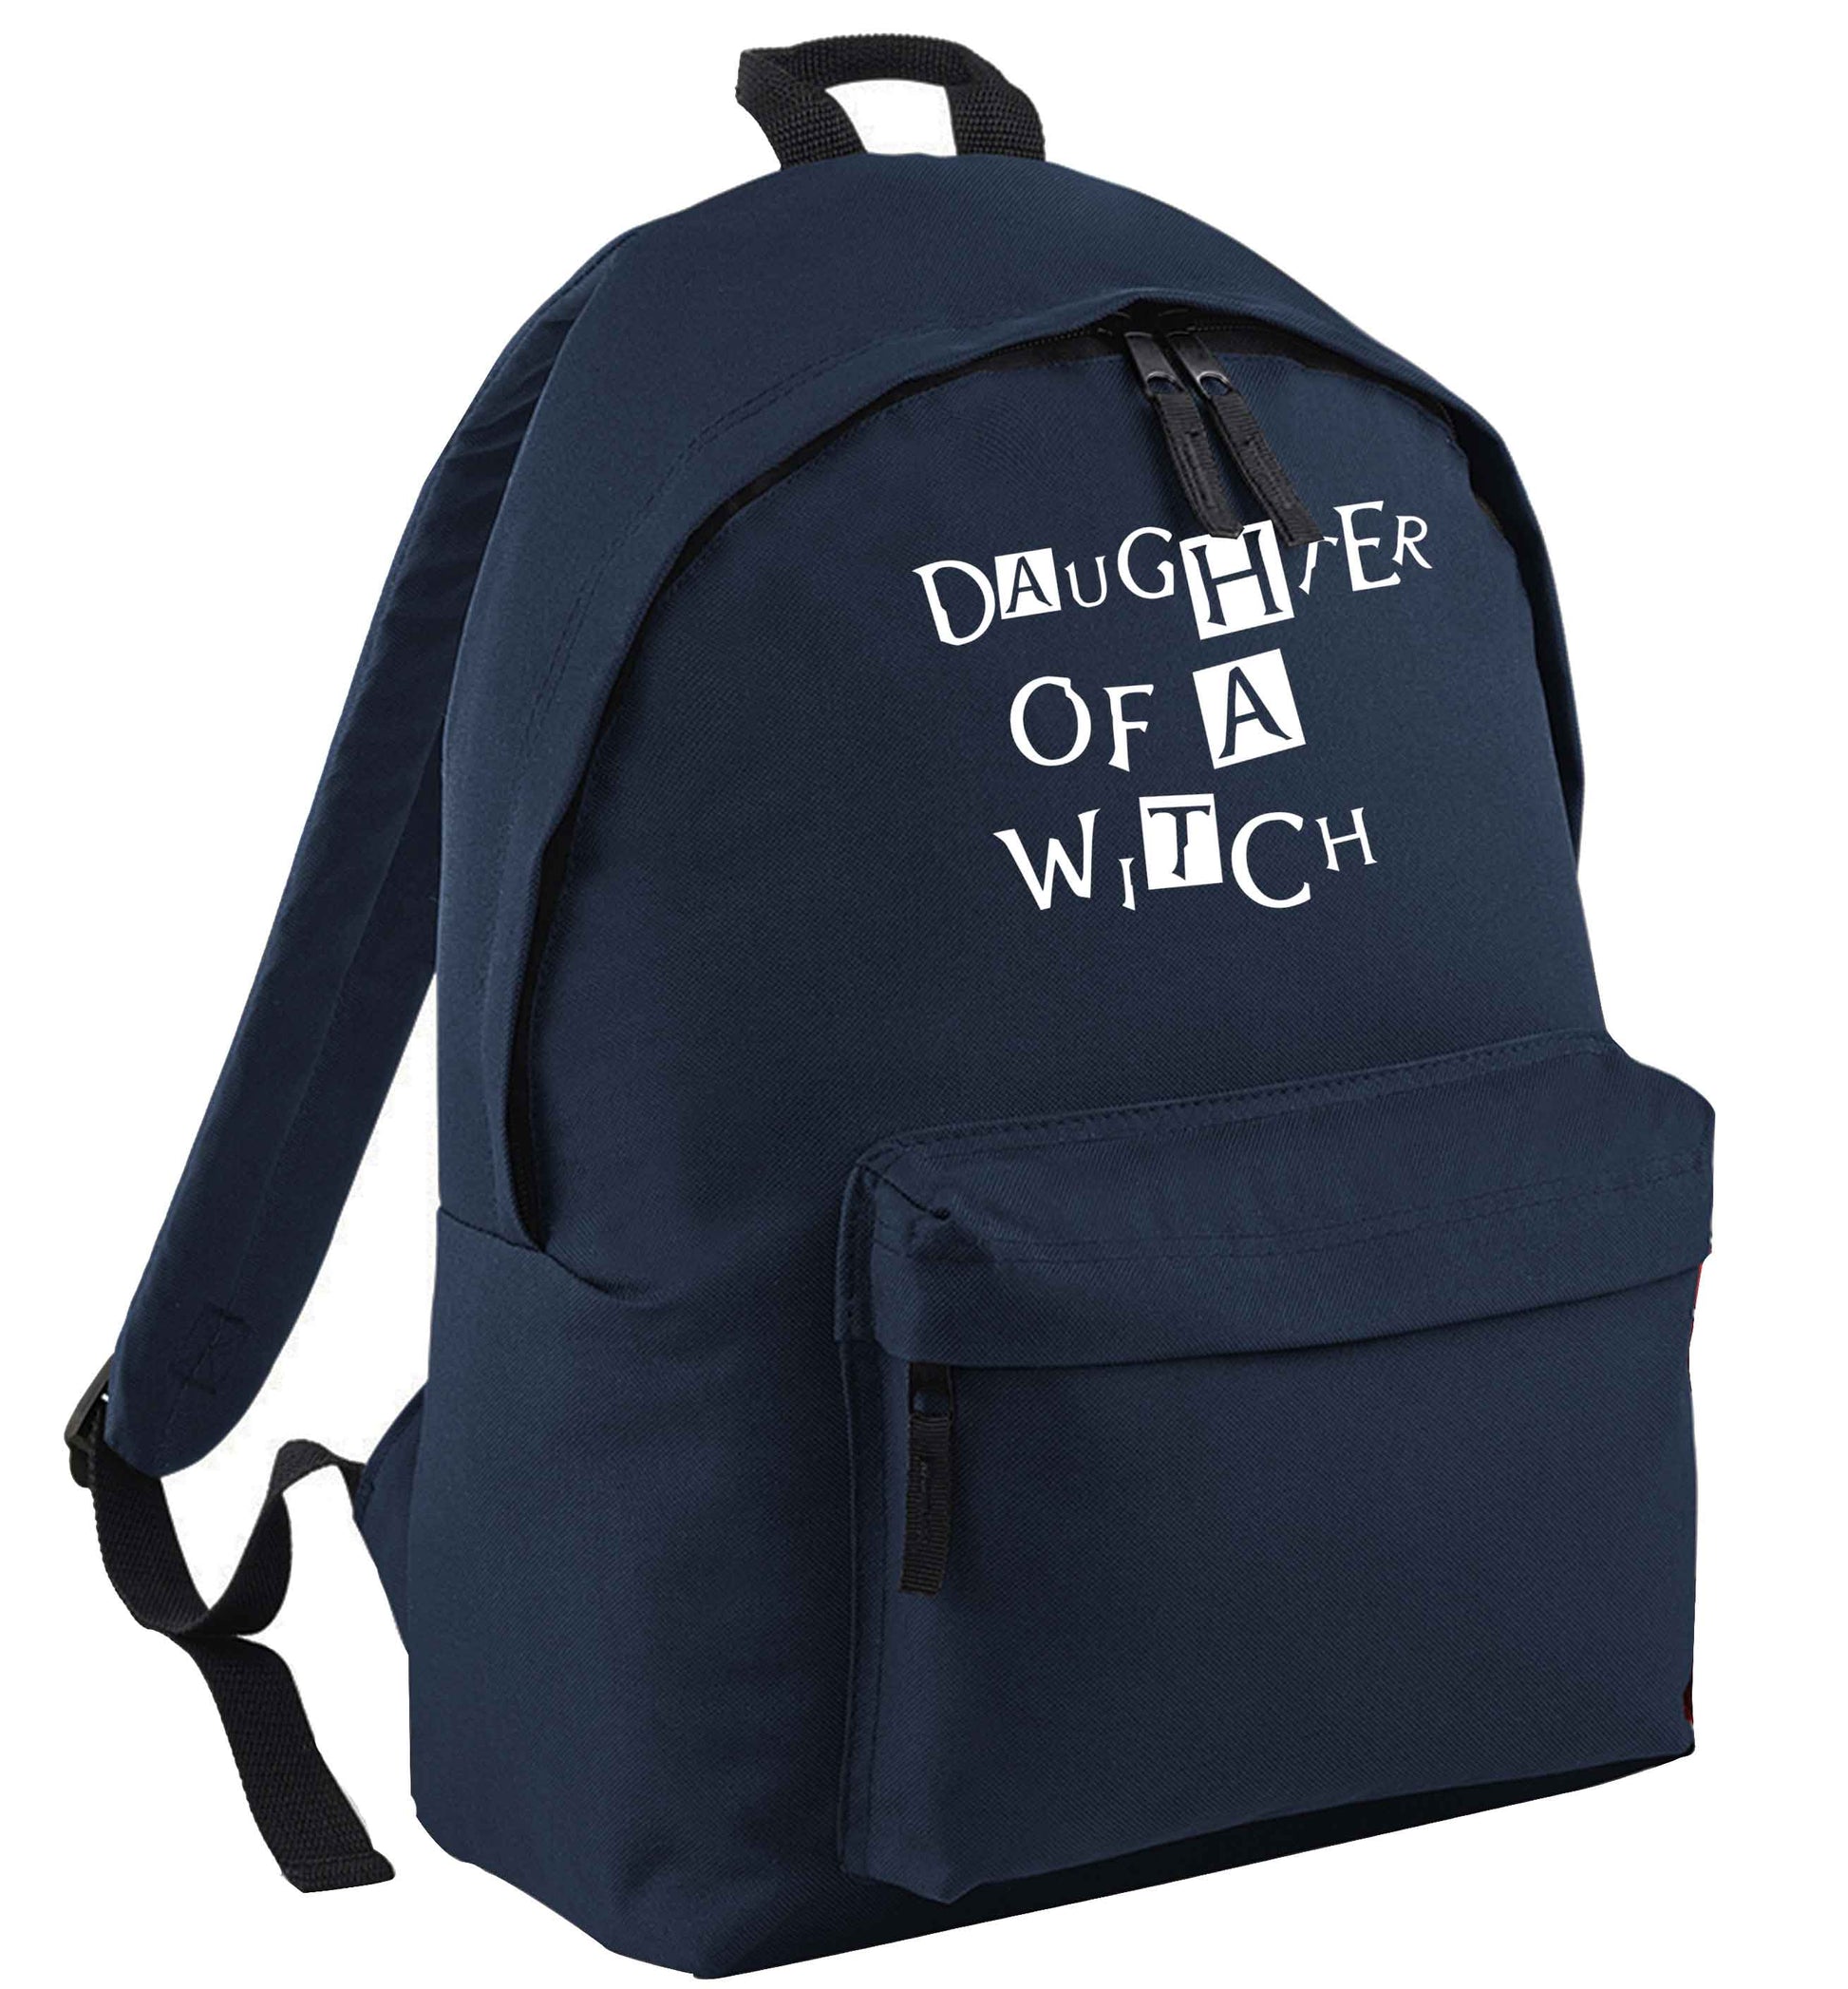 Daughter of a witch navy adults backpack